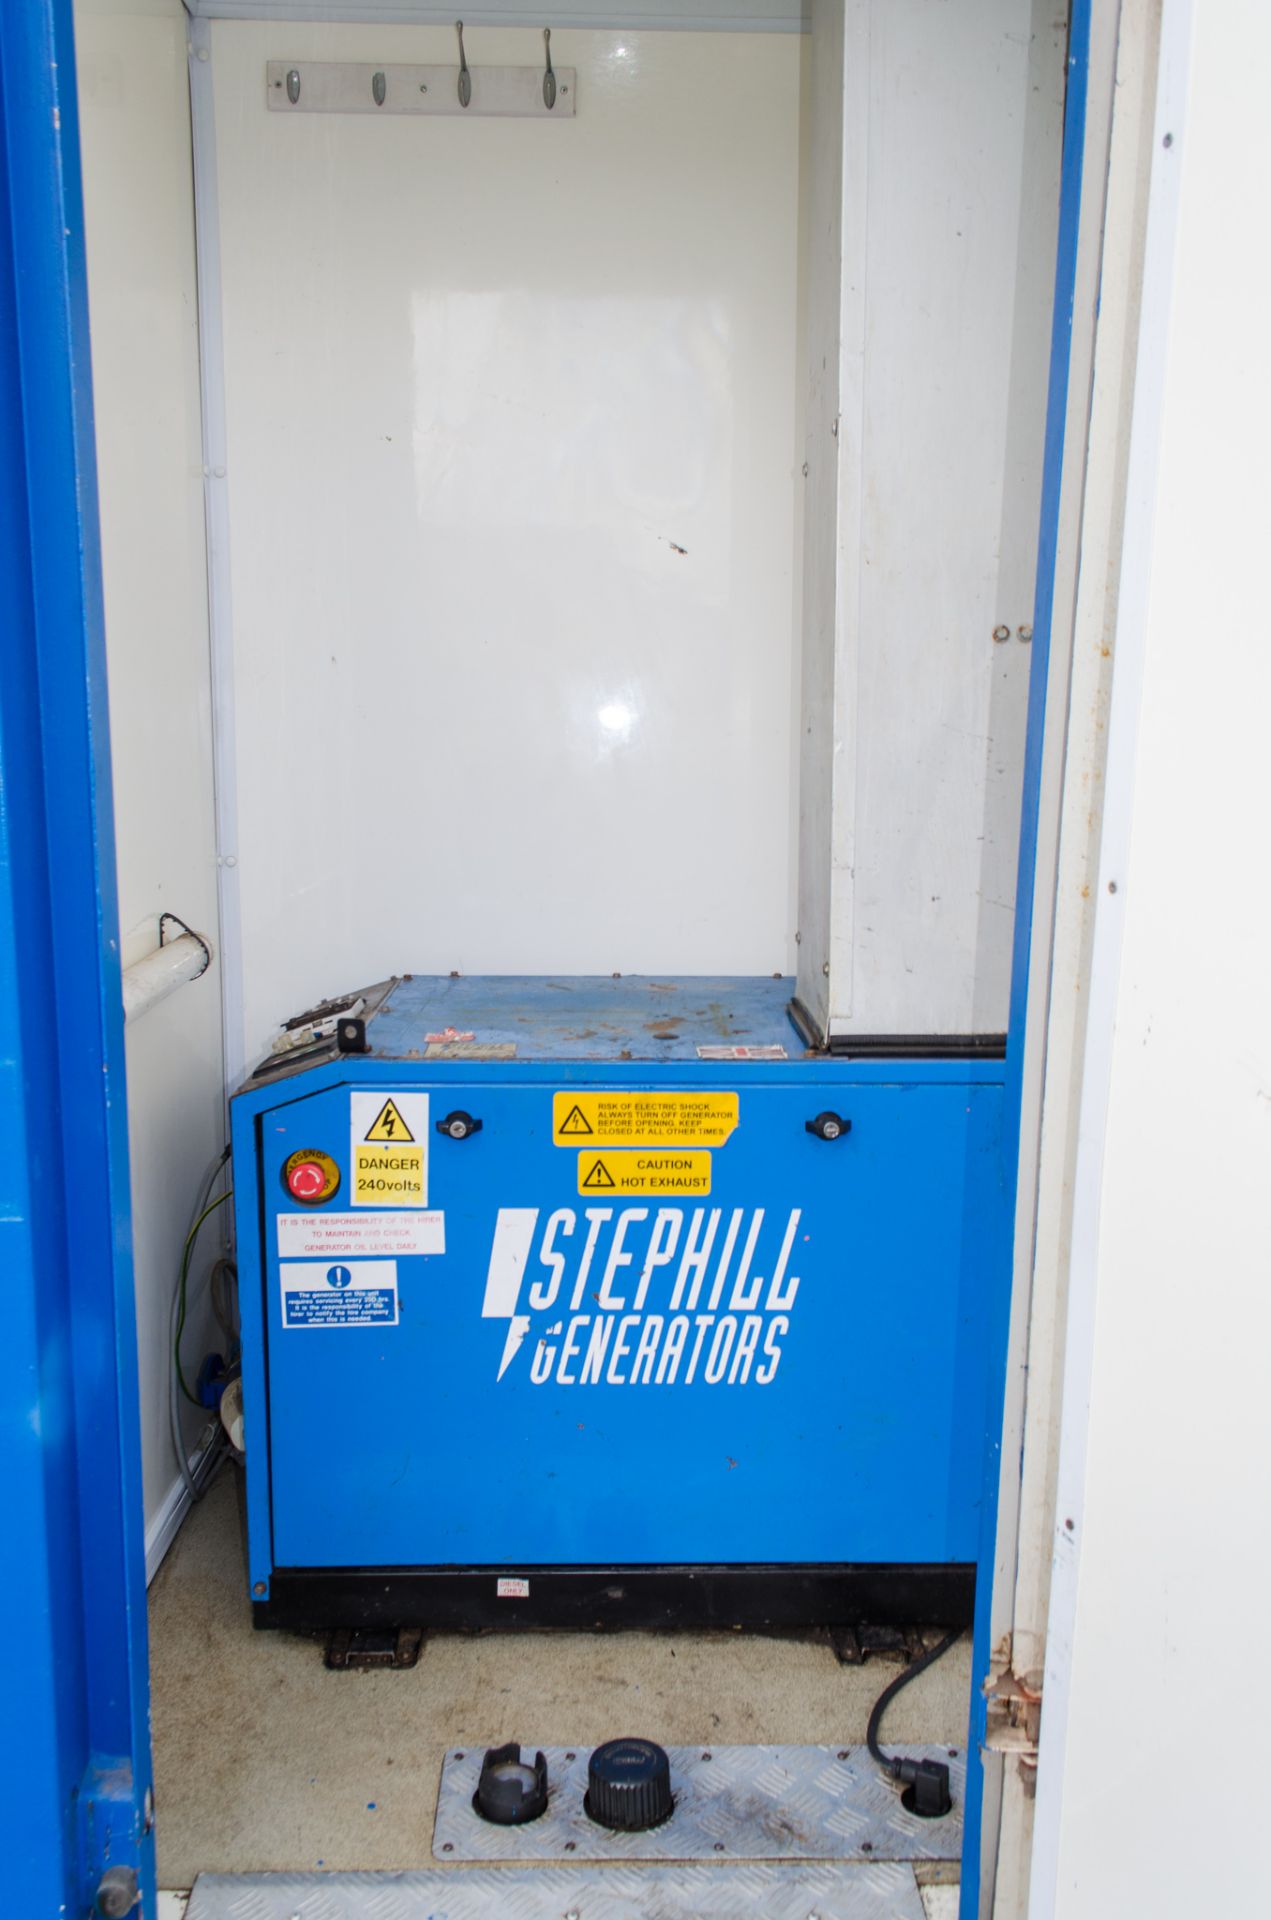 Boss Cabins 12 ft x 8 ft steel anti vandal mobile welfare unit Comprising of: Canteen, toilet & - Image 10 of 11